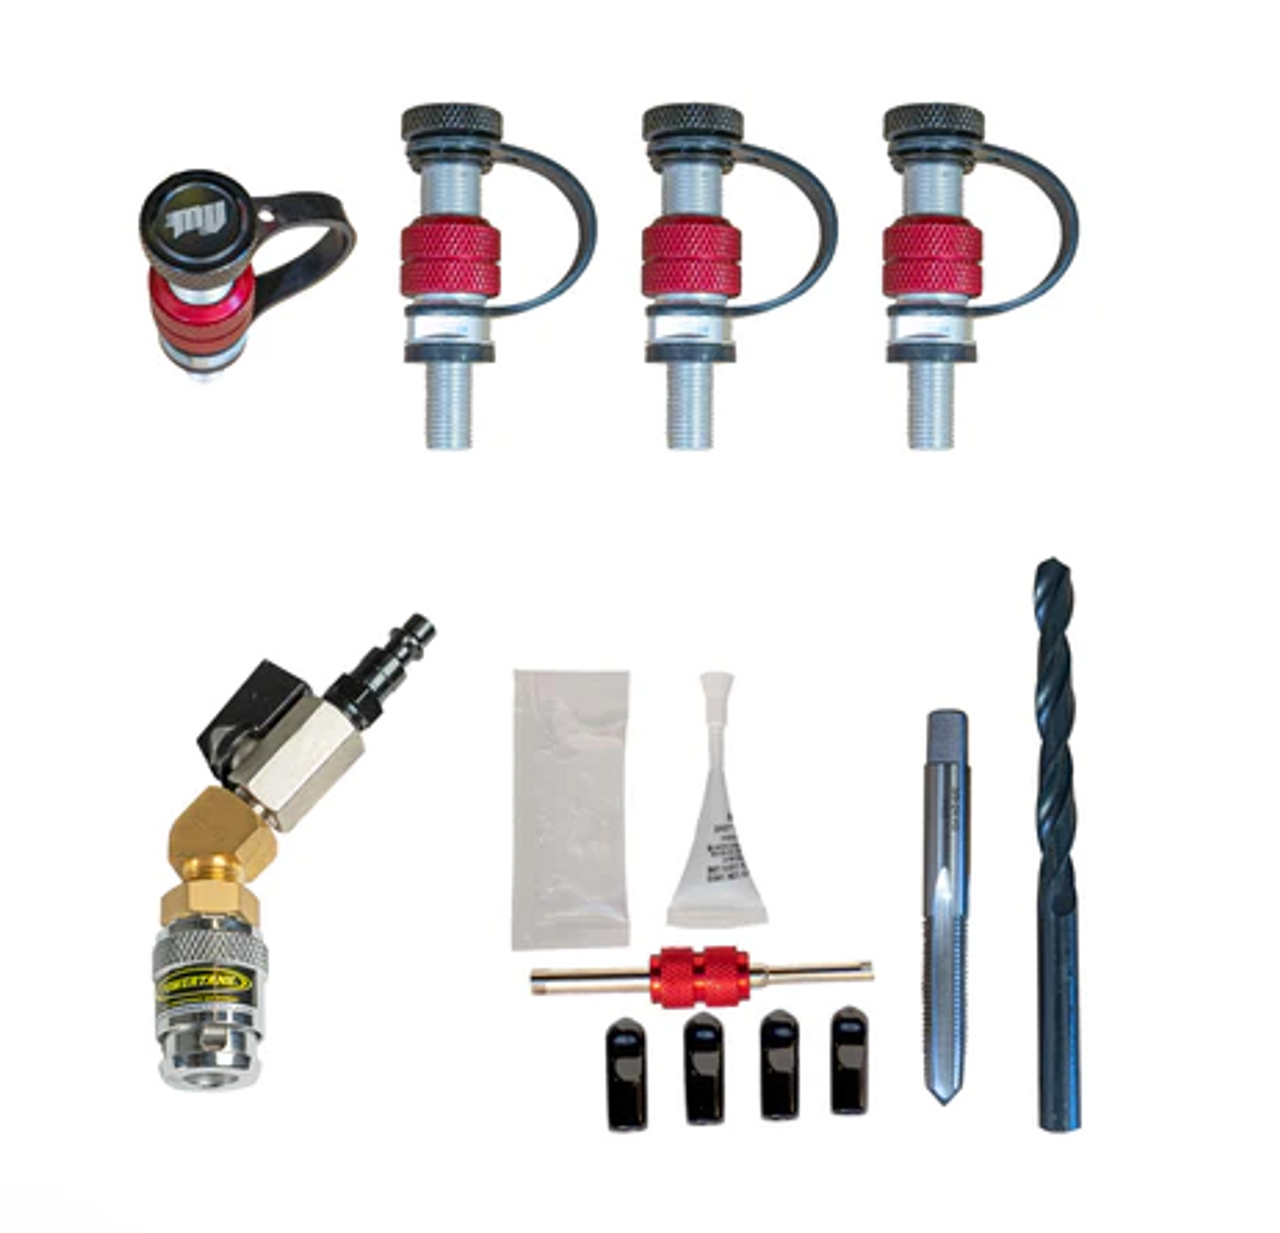 PowerTank MON-8800 Monster Valve Tap2 Tap Install Rapid Tire Air Up and Air Down Kit